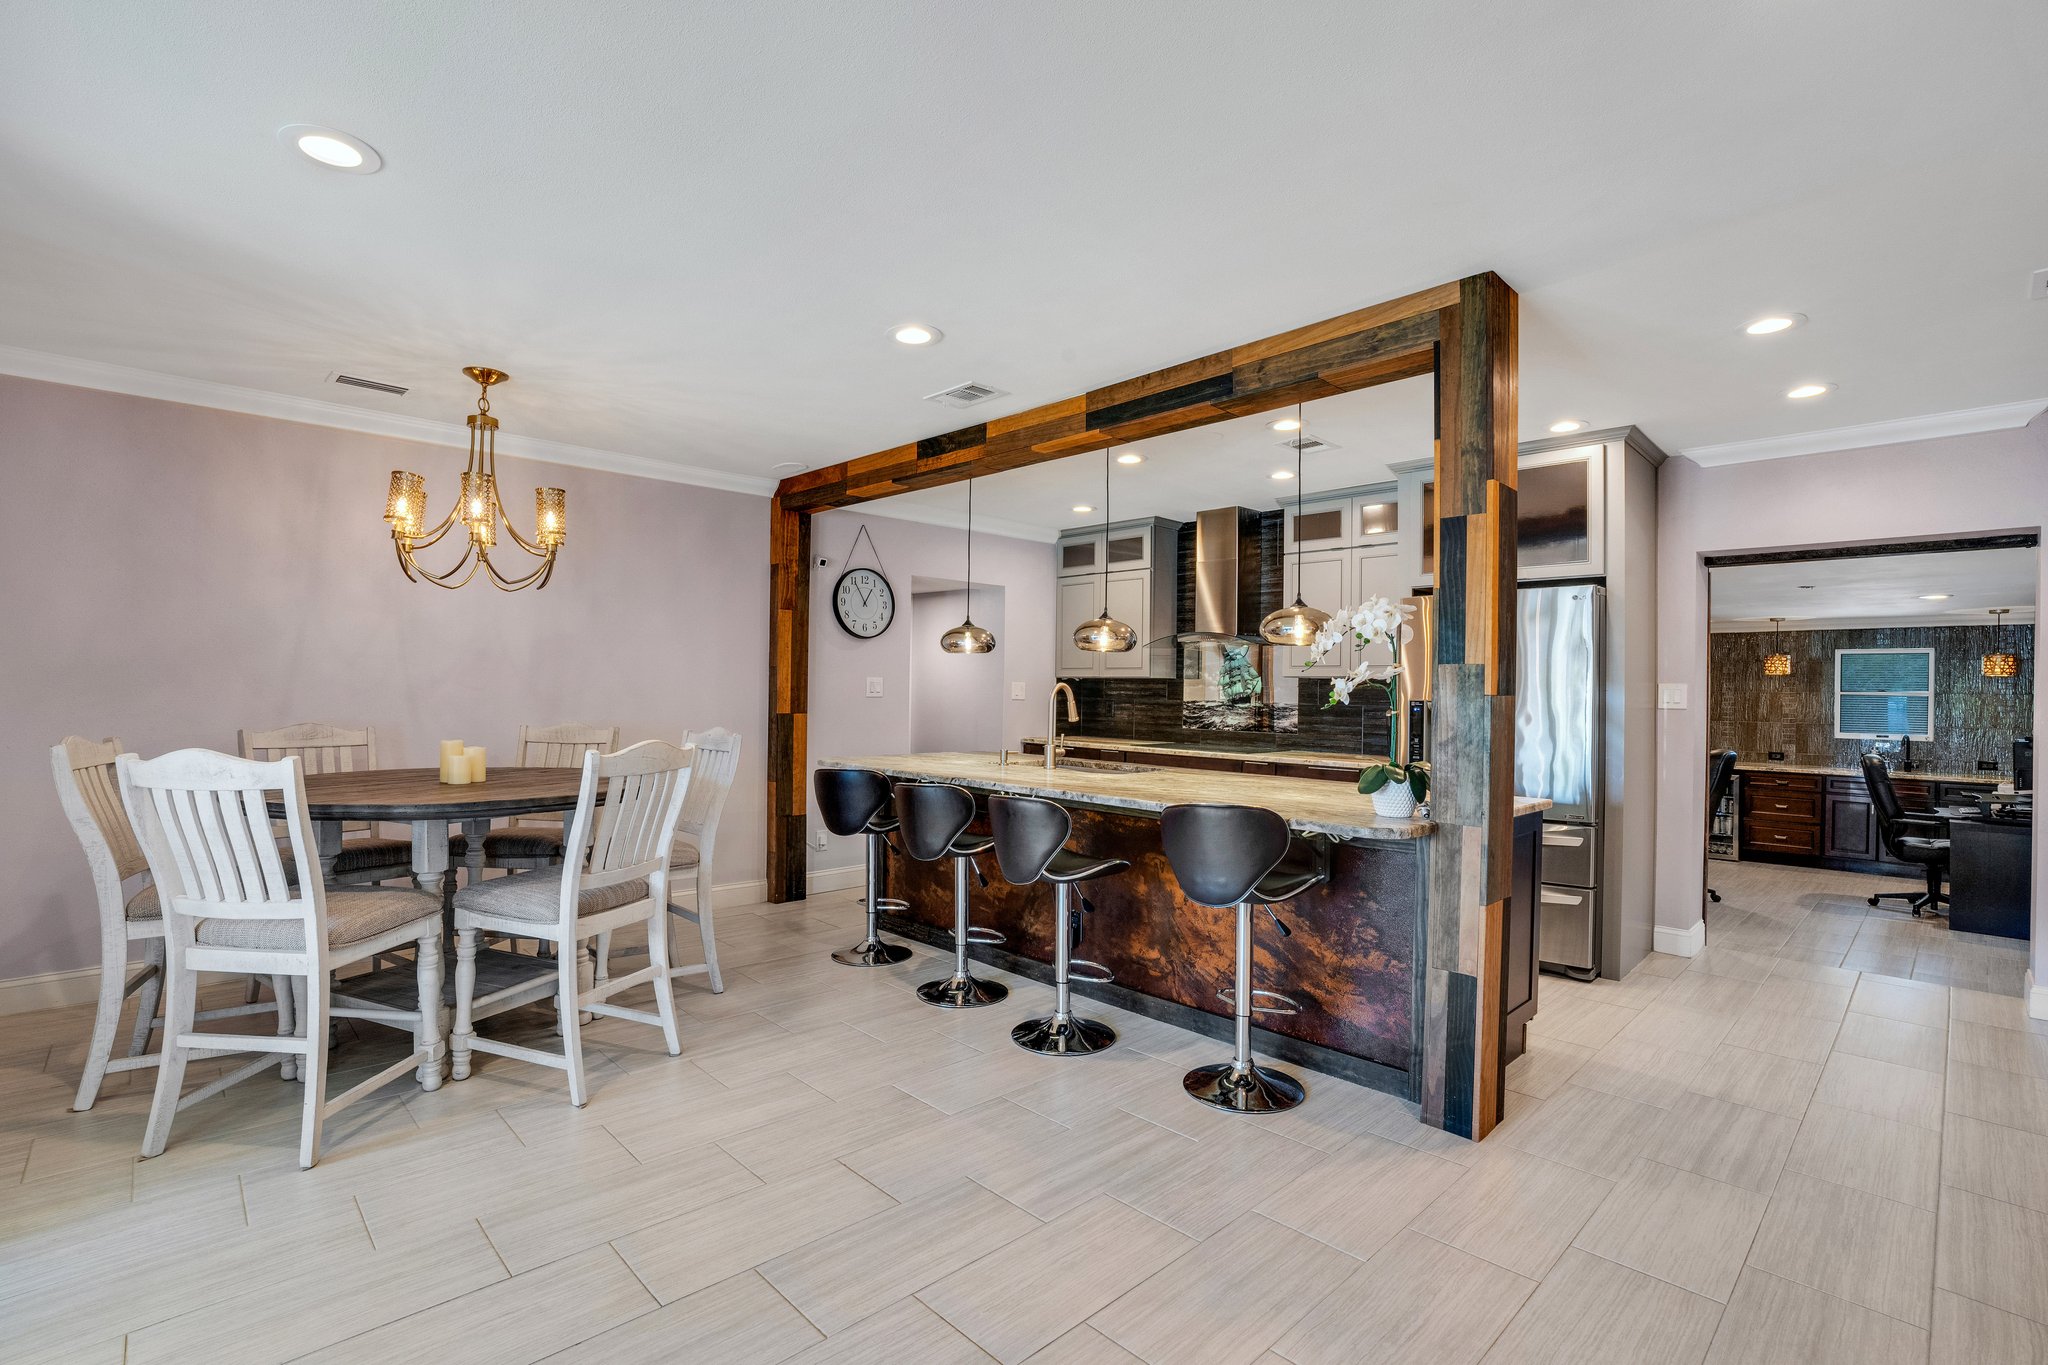 Dining Room with Open Kitchen, Matching Tile Floors Throughout